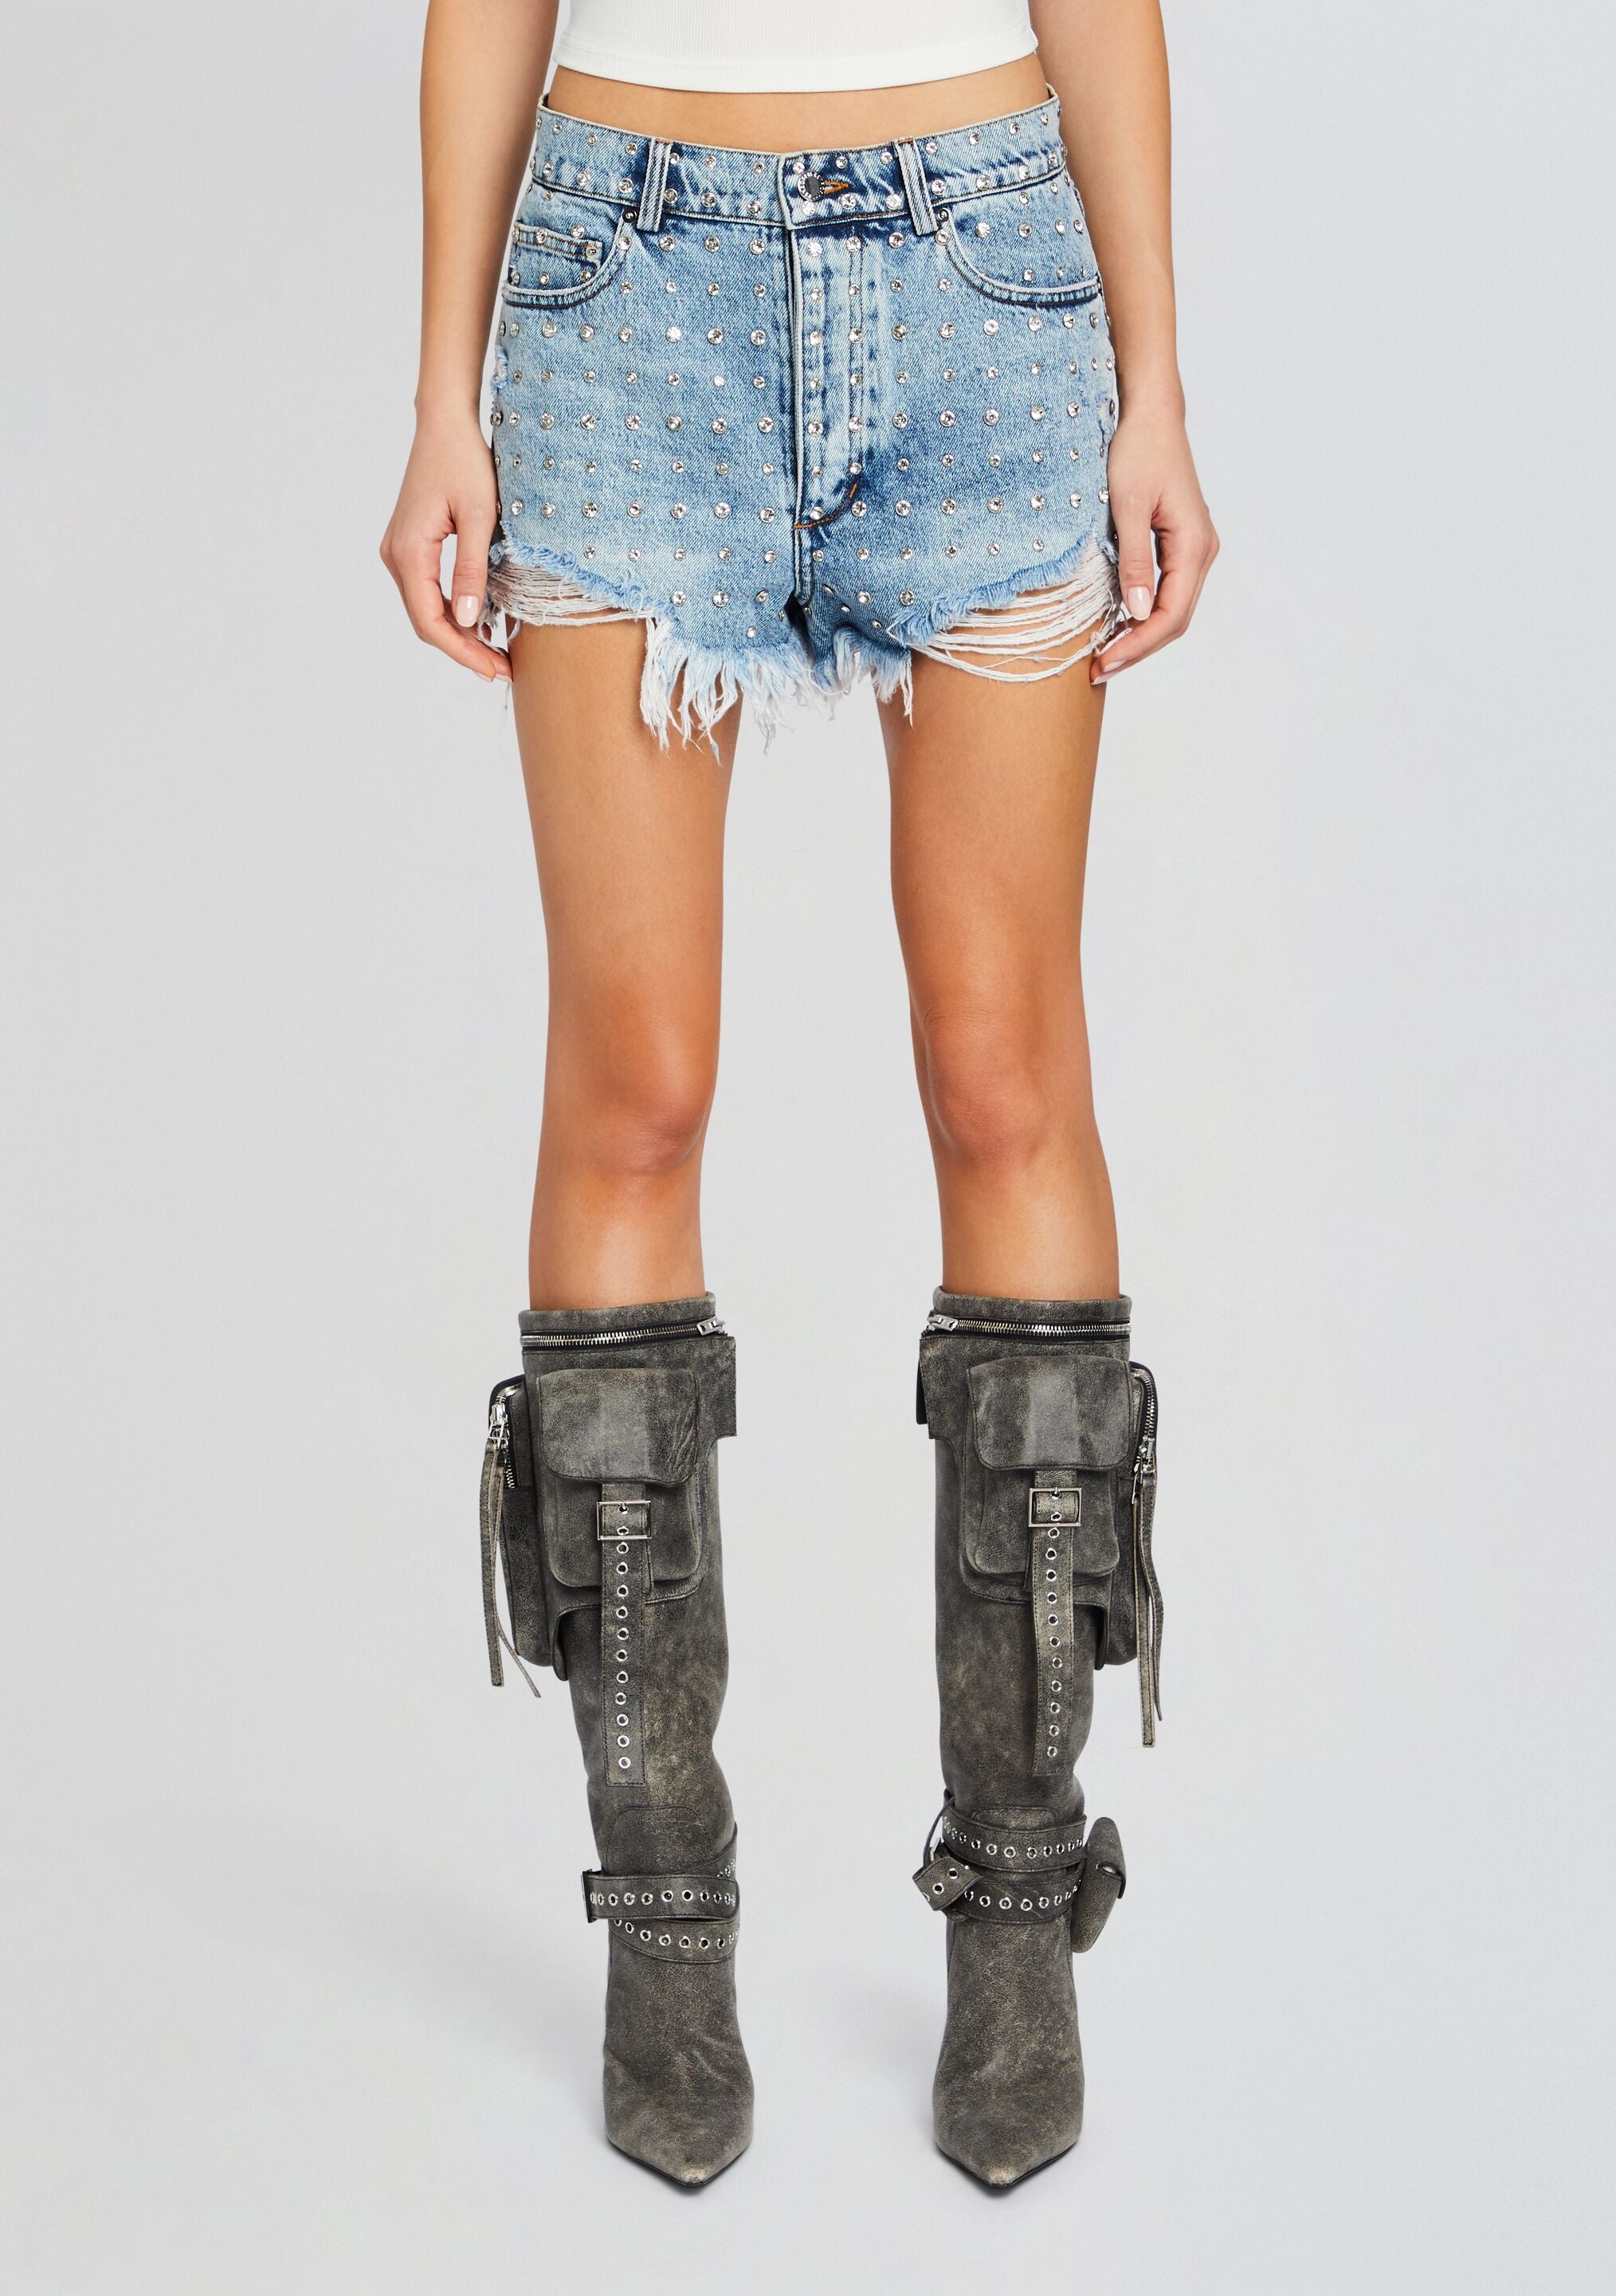 Neon Blonde Lover Embellished Denim Short | Urban Outfitters Australia  Official Site